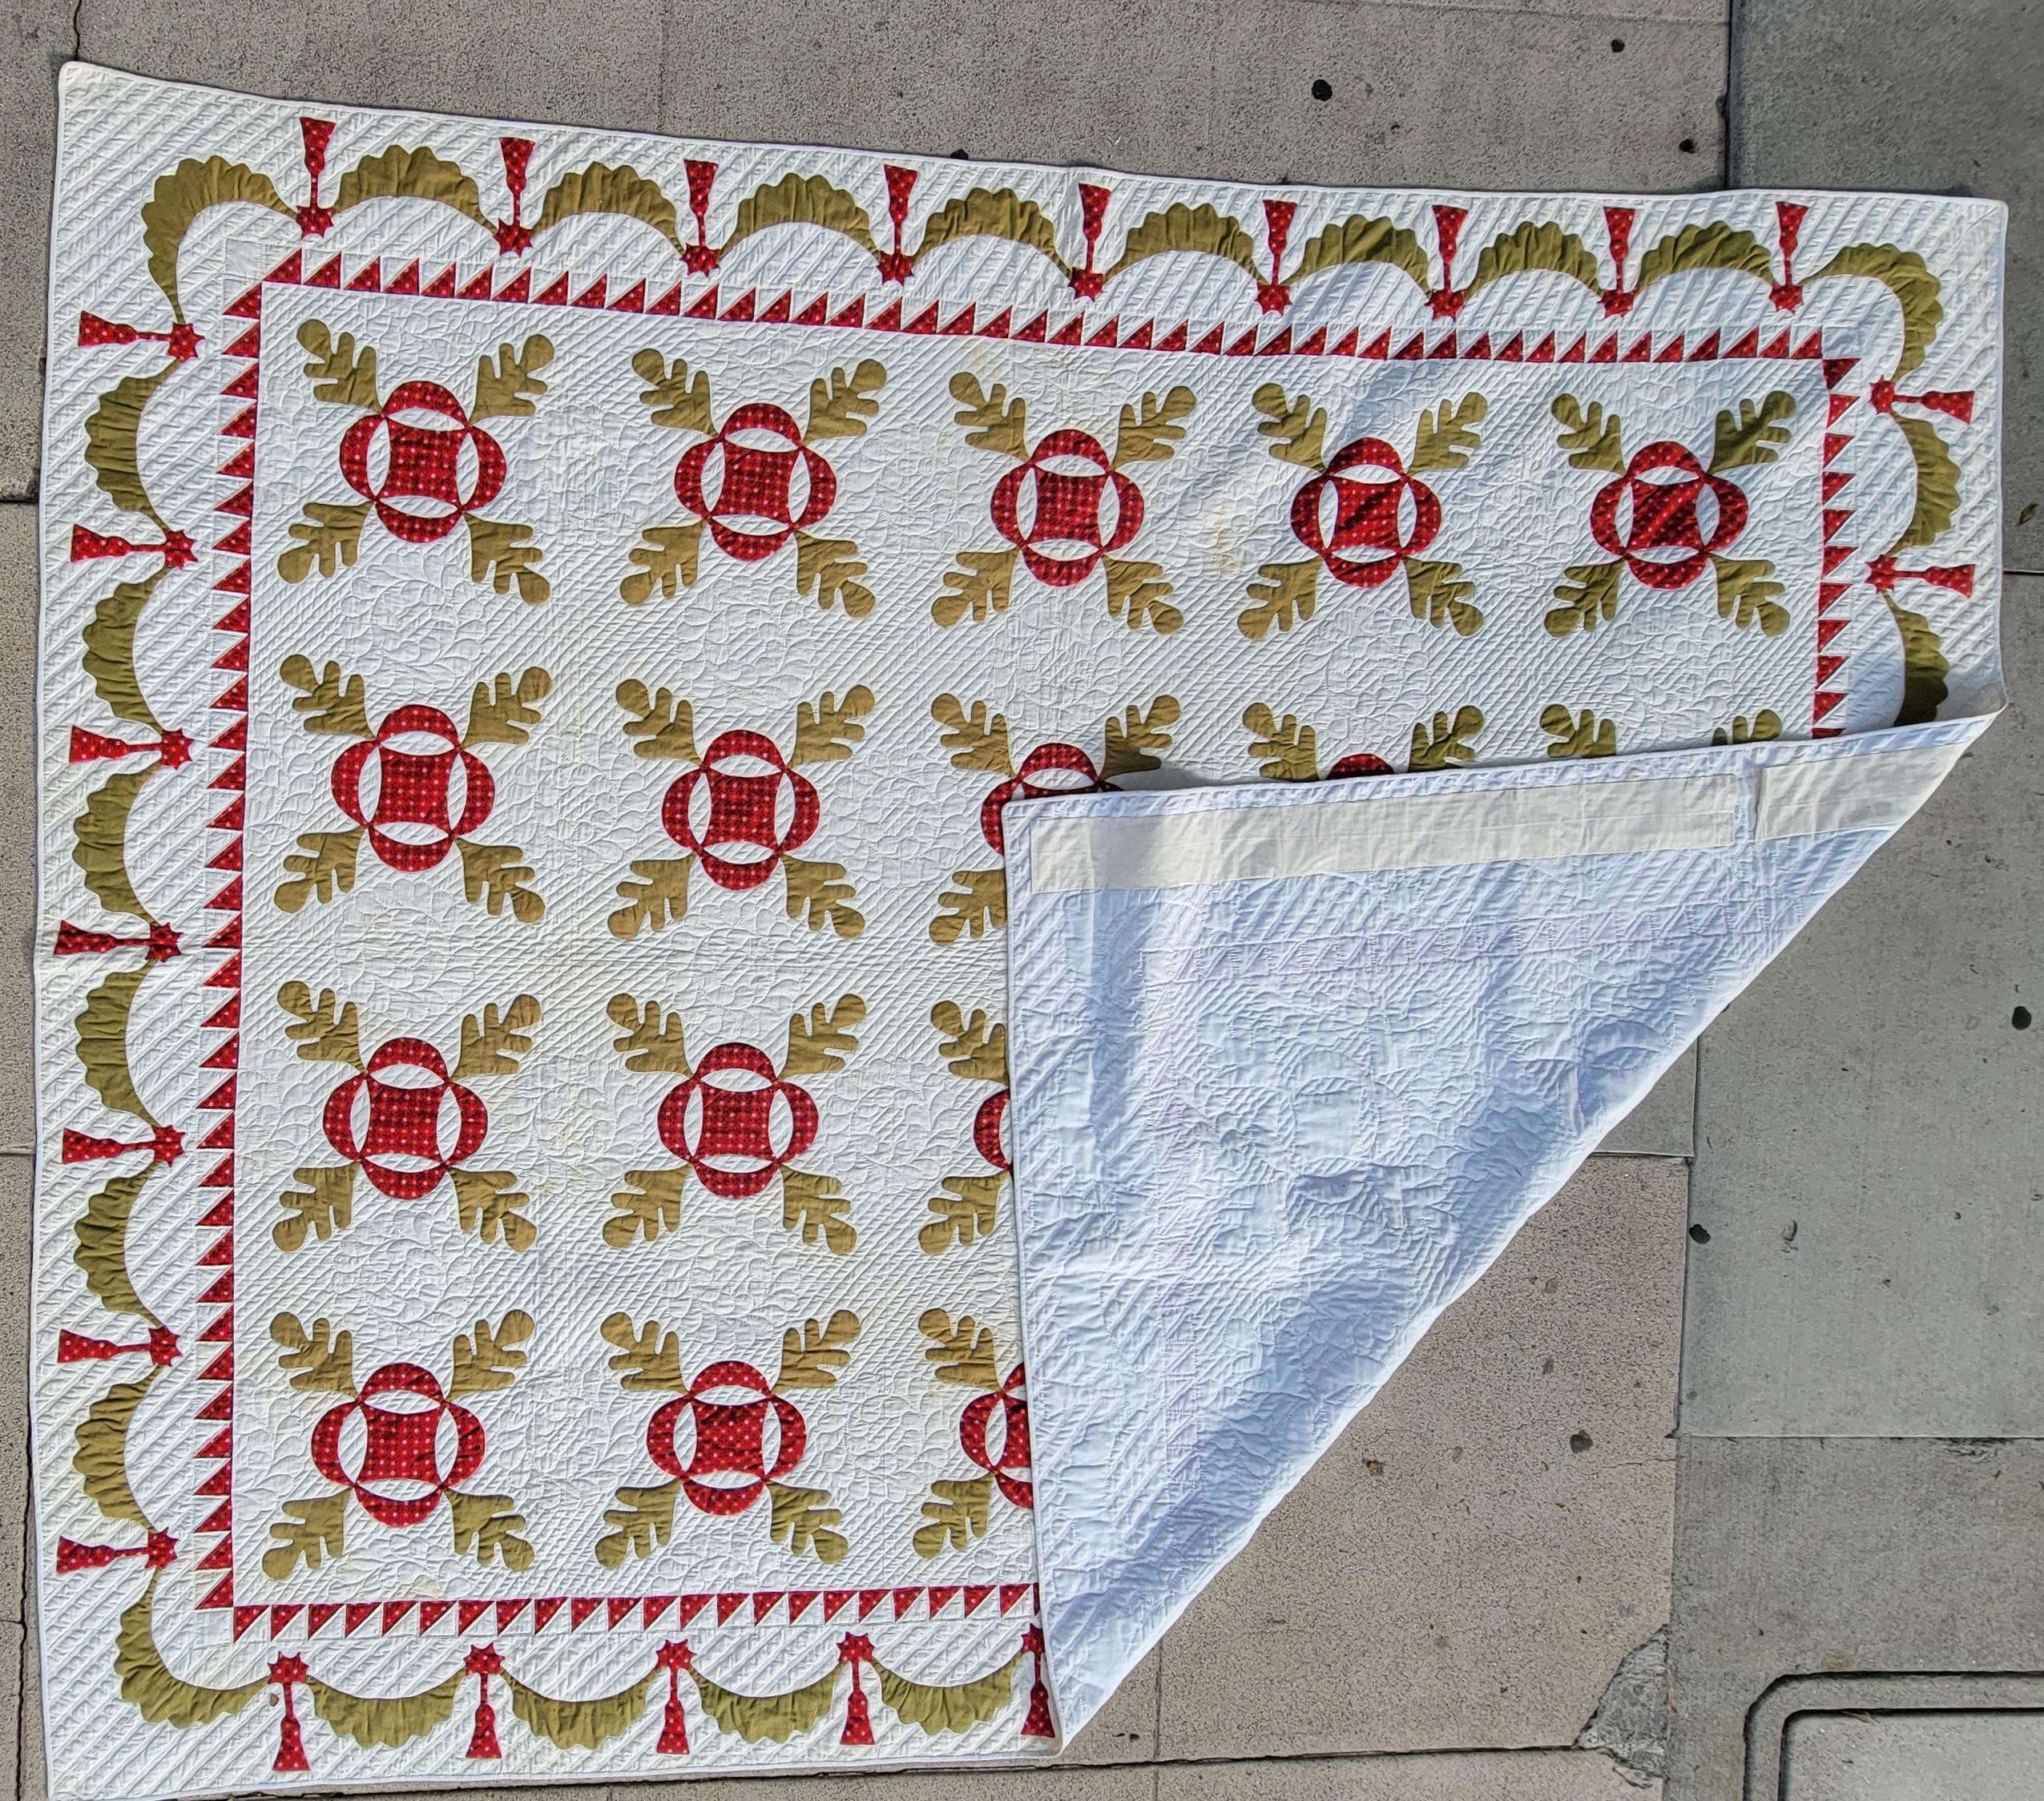 This amazing autumn leaf applique quilt is in pristine condition and has a very unusual swag border. It comes to us from Southern Ohio from the family -mother that made the quilt. This quilt is from the early 20thc and was quilted years later.